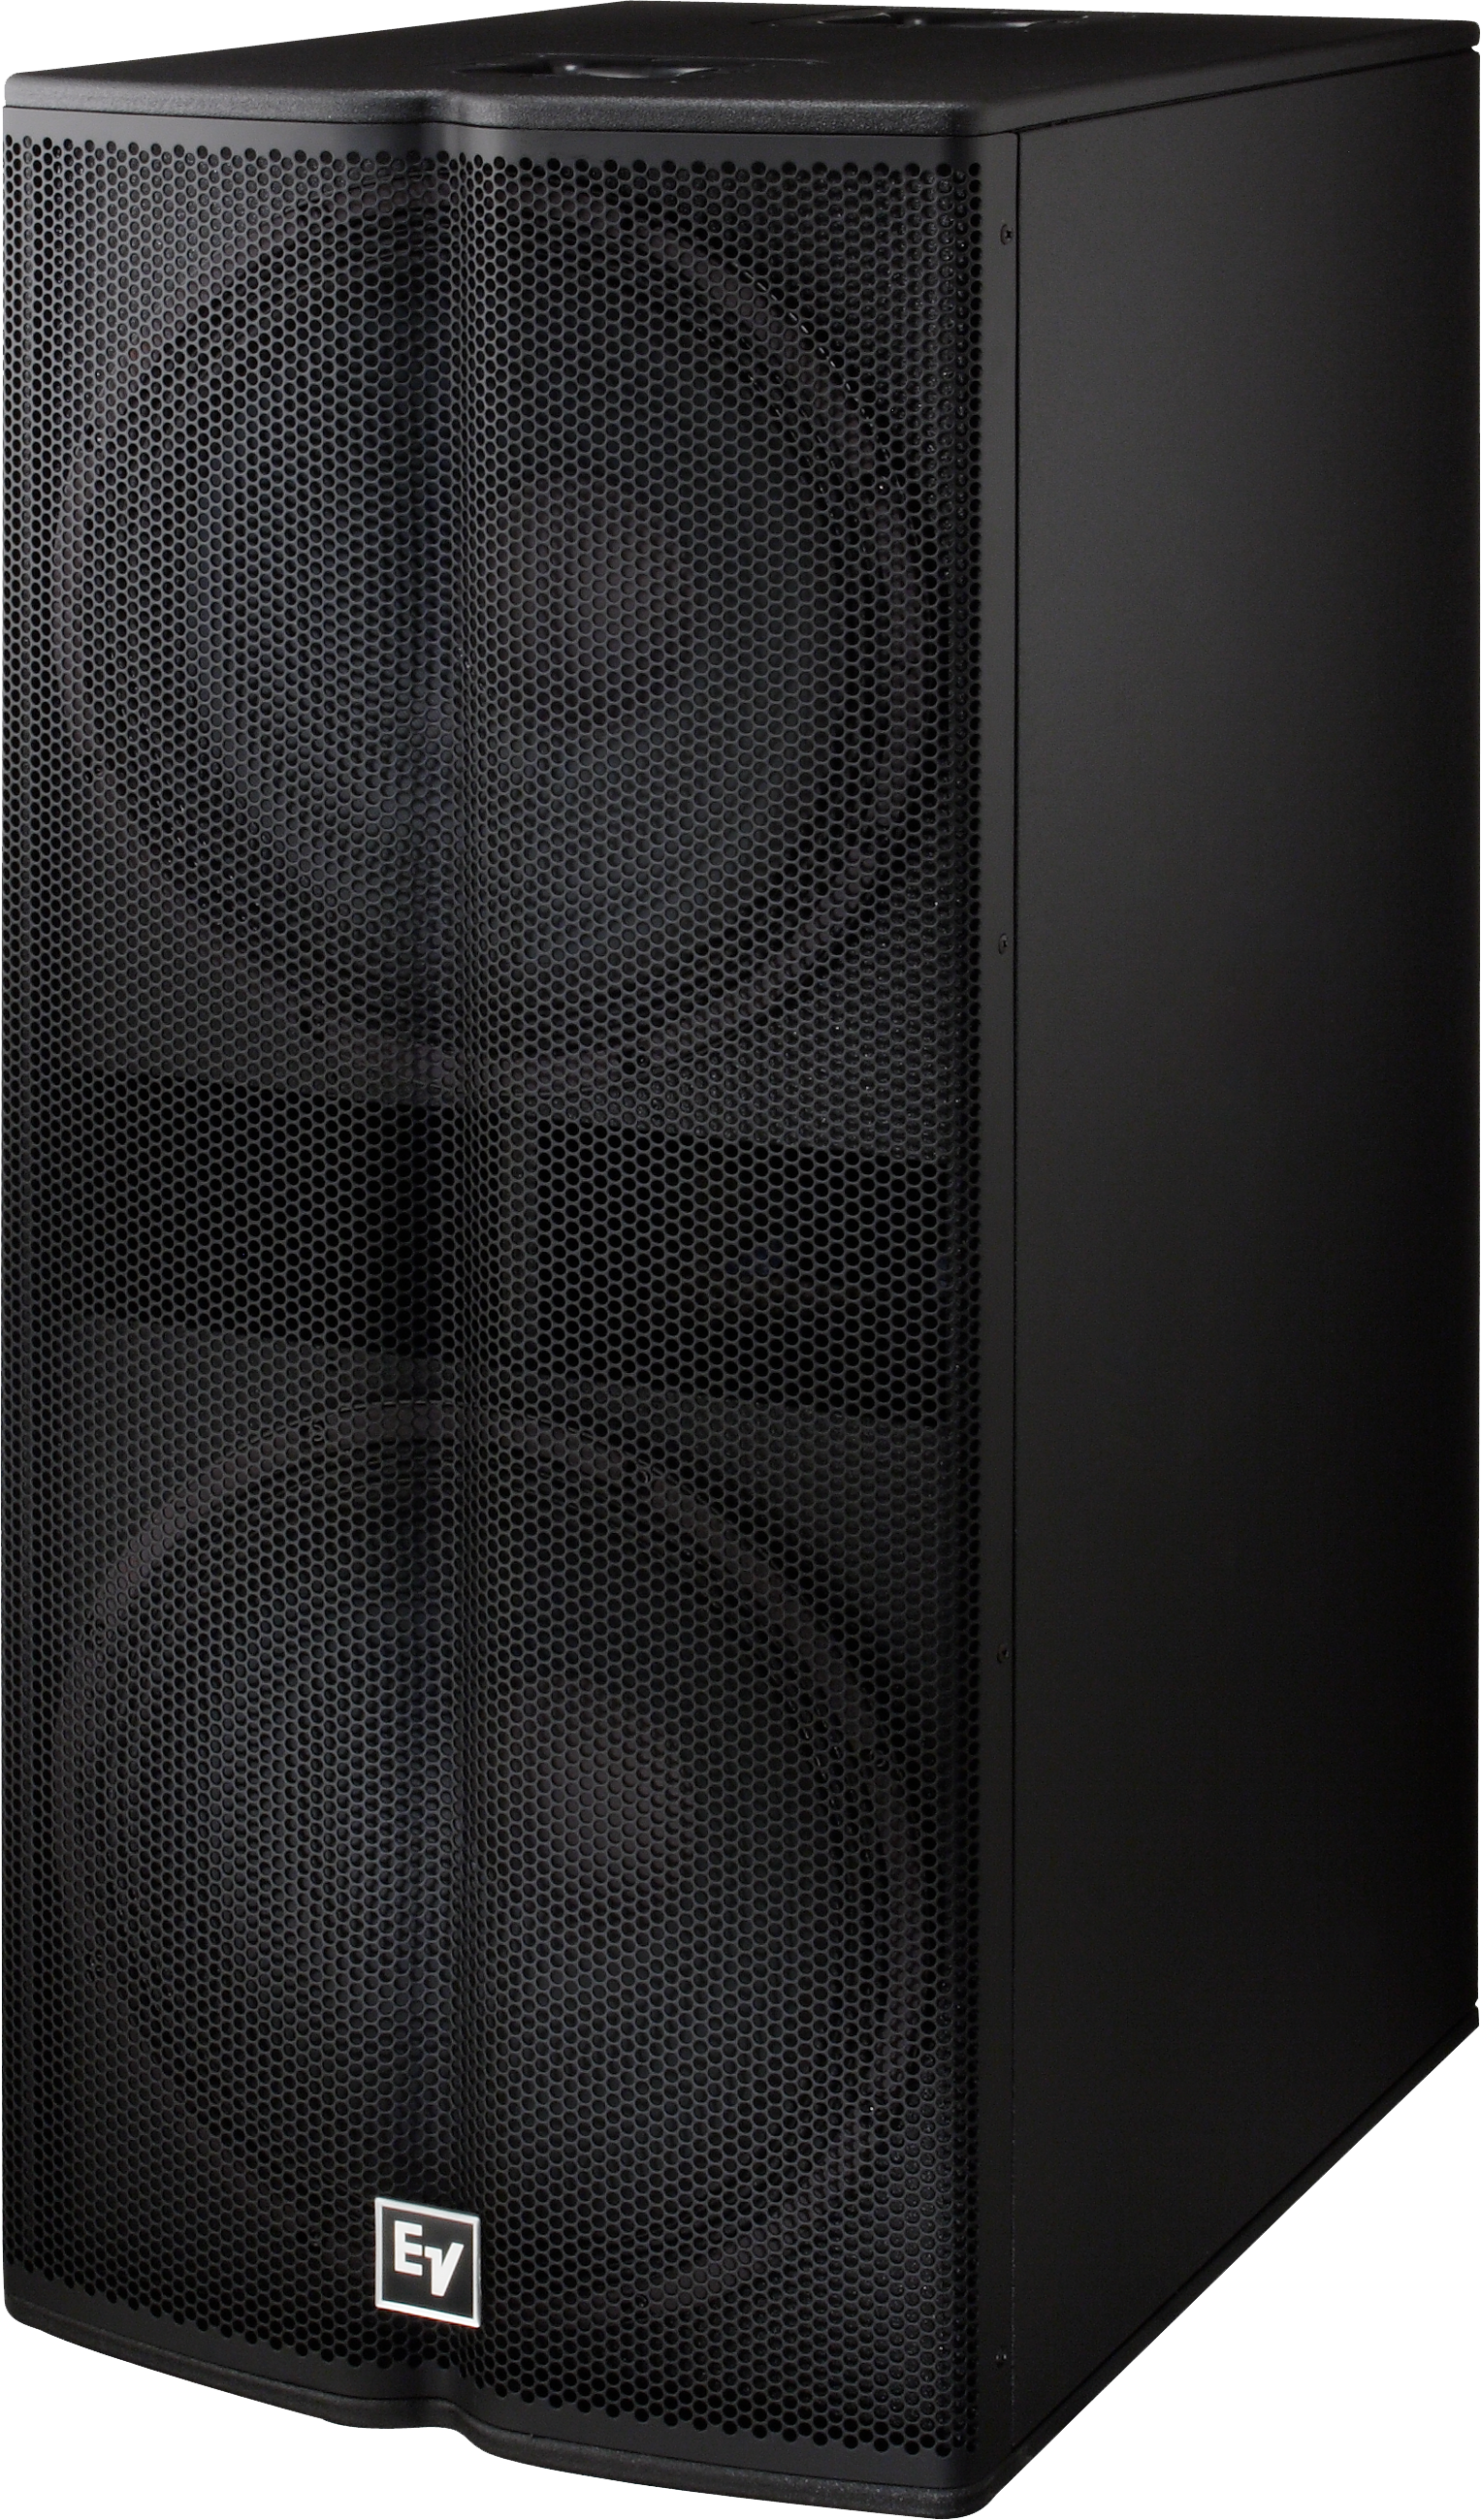 Electro-Voice 18" Subwoofers Twin JBL CABINETS With Replacement Electrovoice Drivers. 